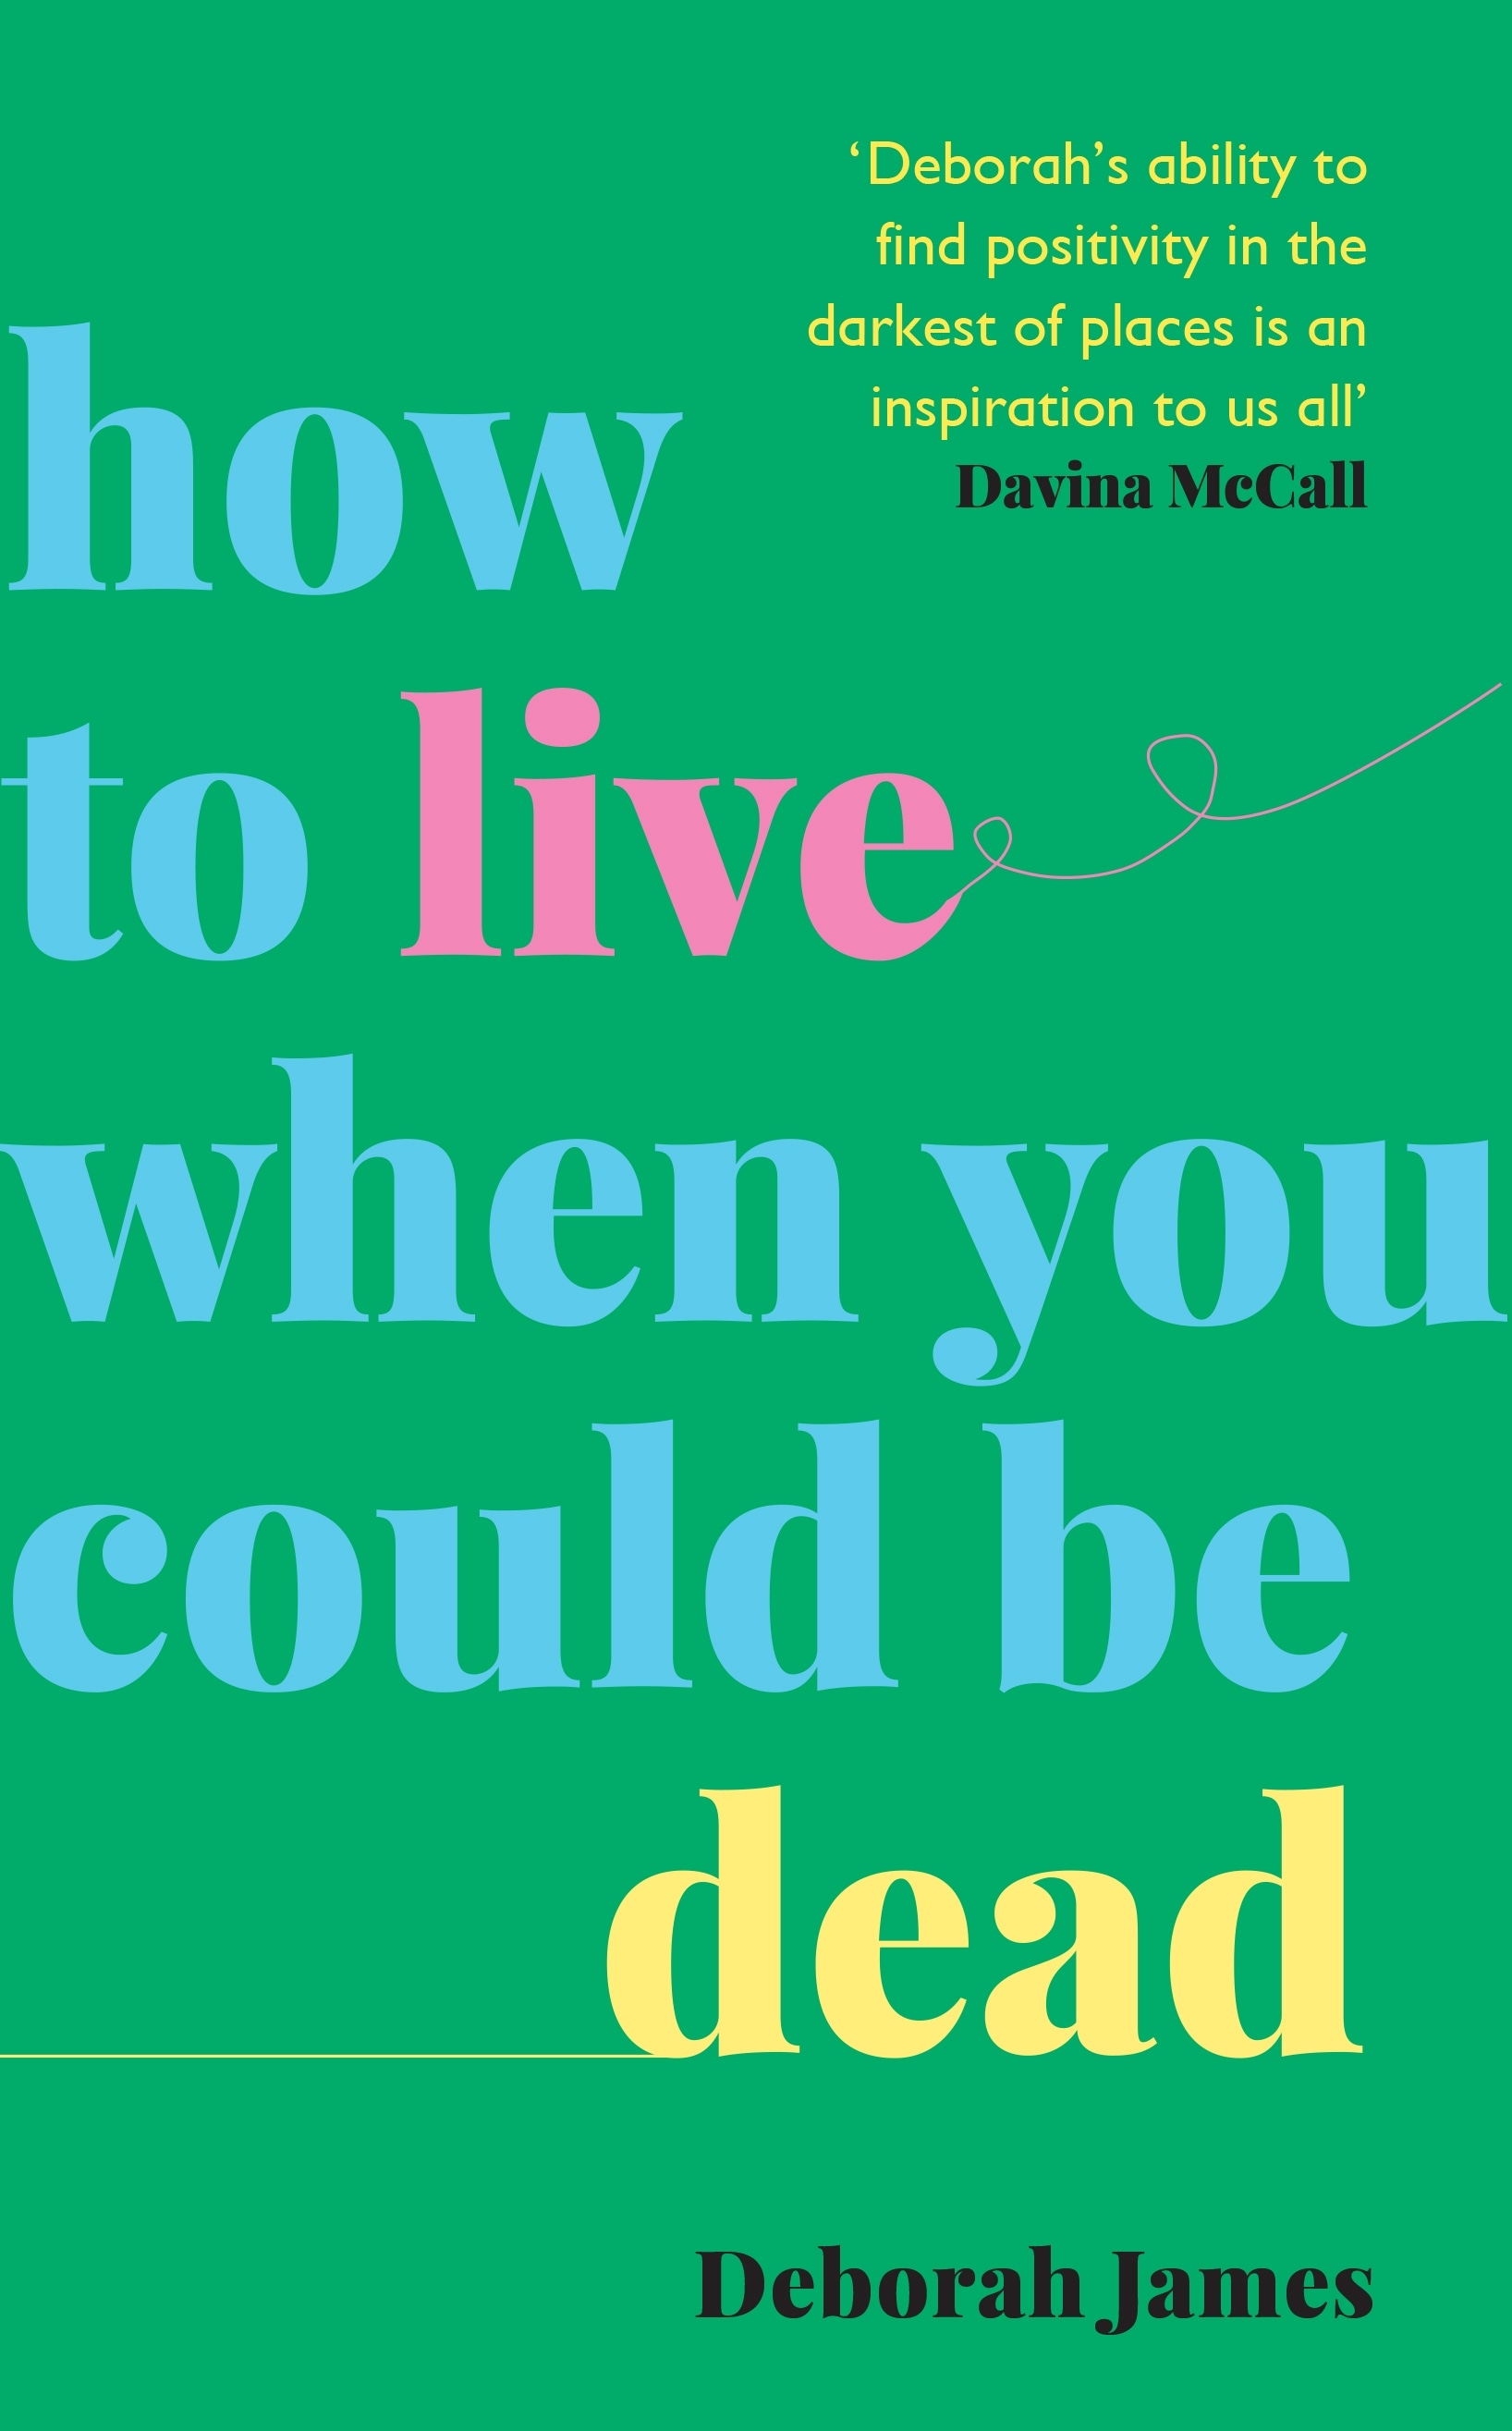 Book “How to Live When You Could Be Dead” by Deborah James — January 1, 2098